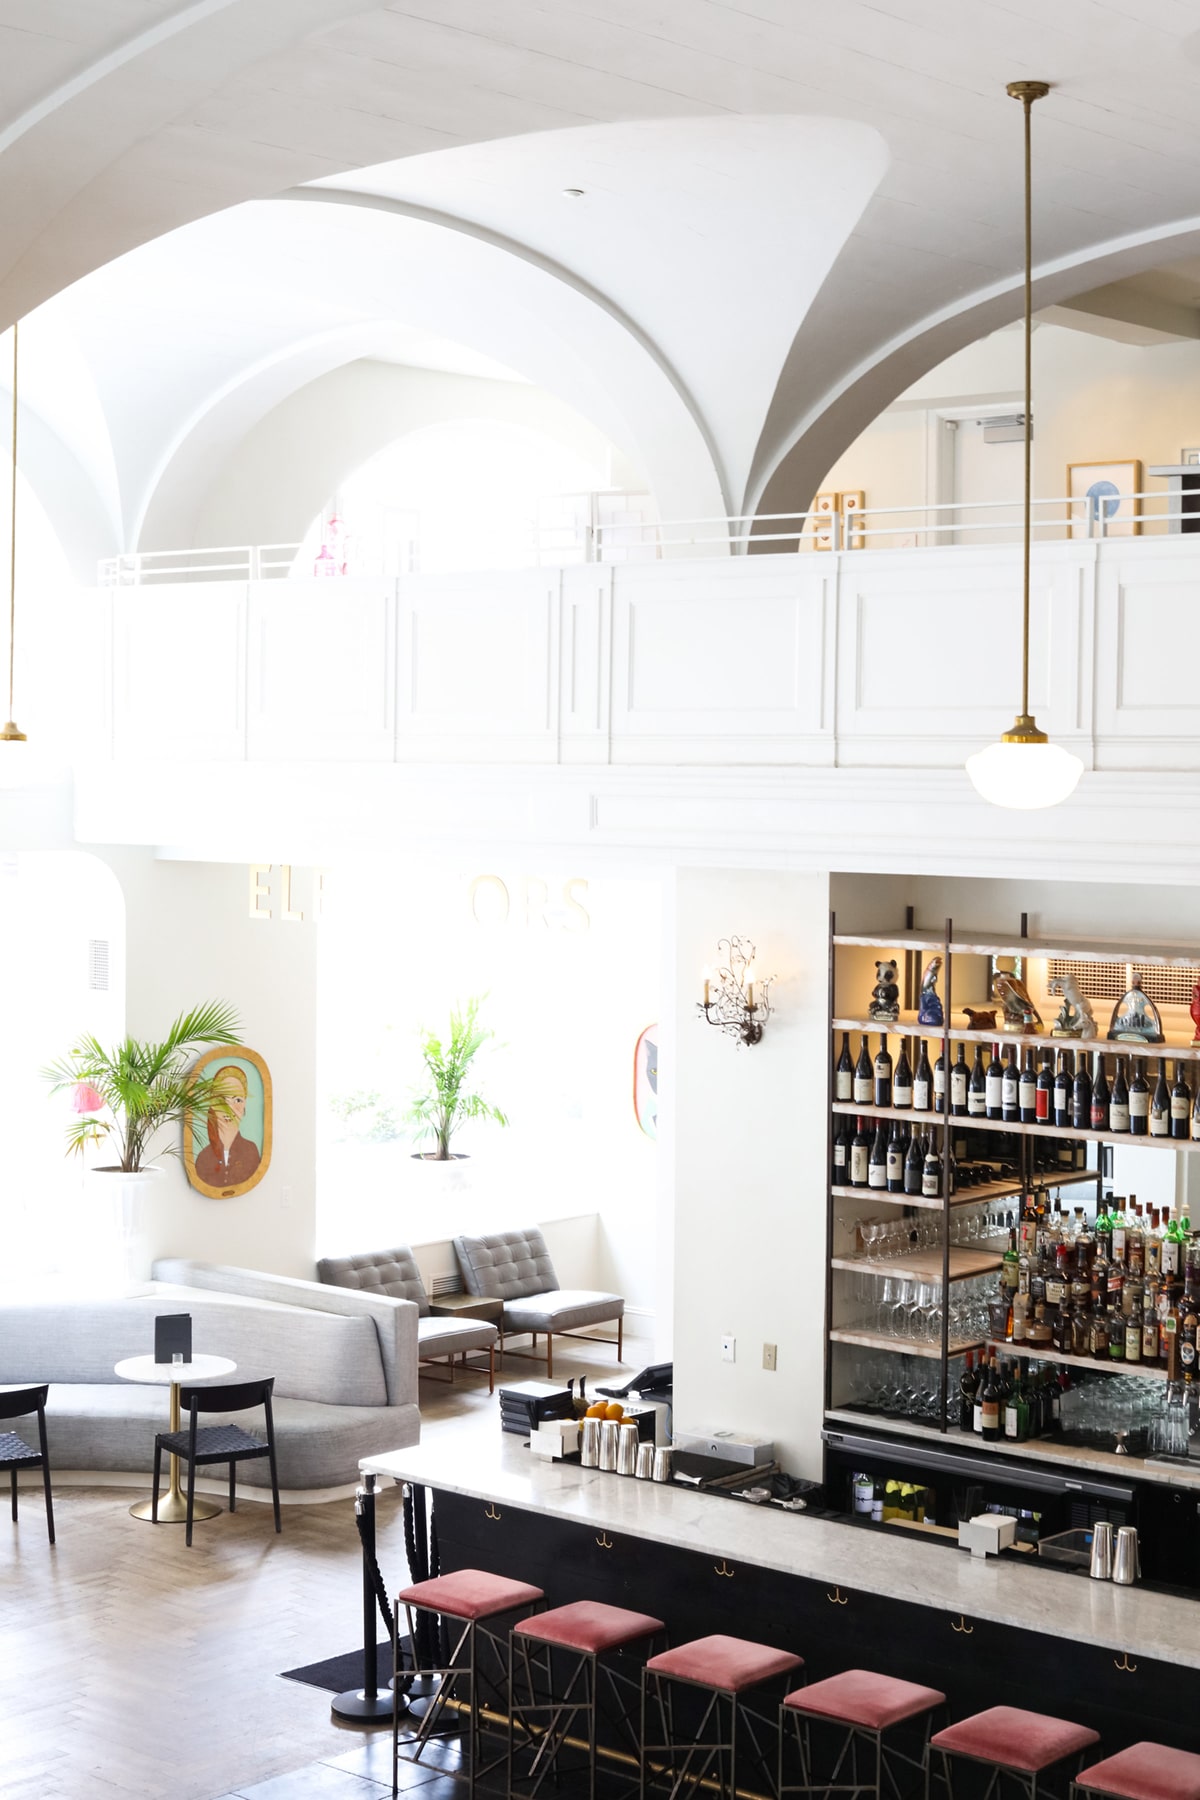 vaulted arch ceilings bring drama to the lobby bar at The Quirk Hotel | wanderlust design on coco kelley